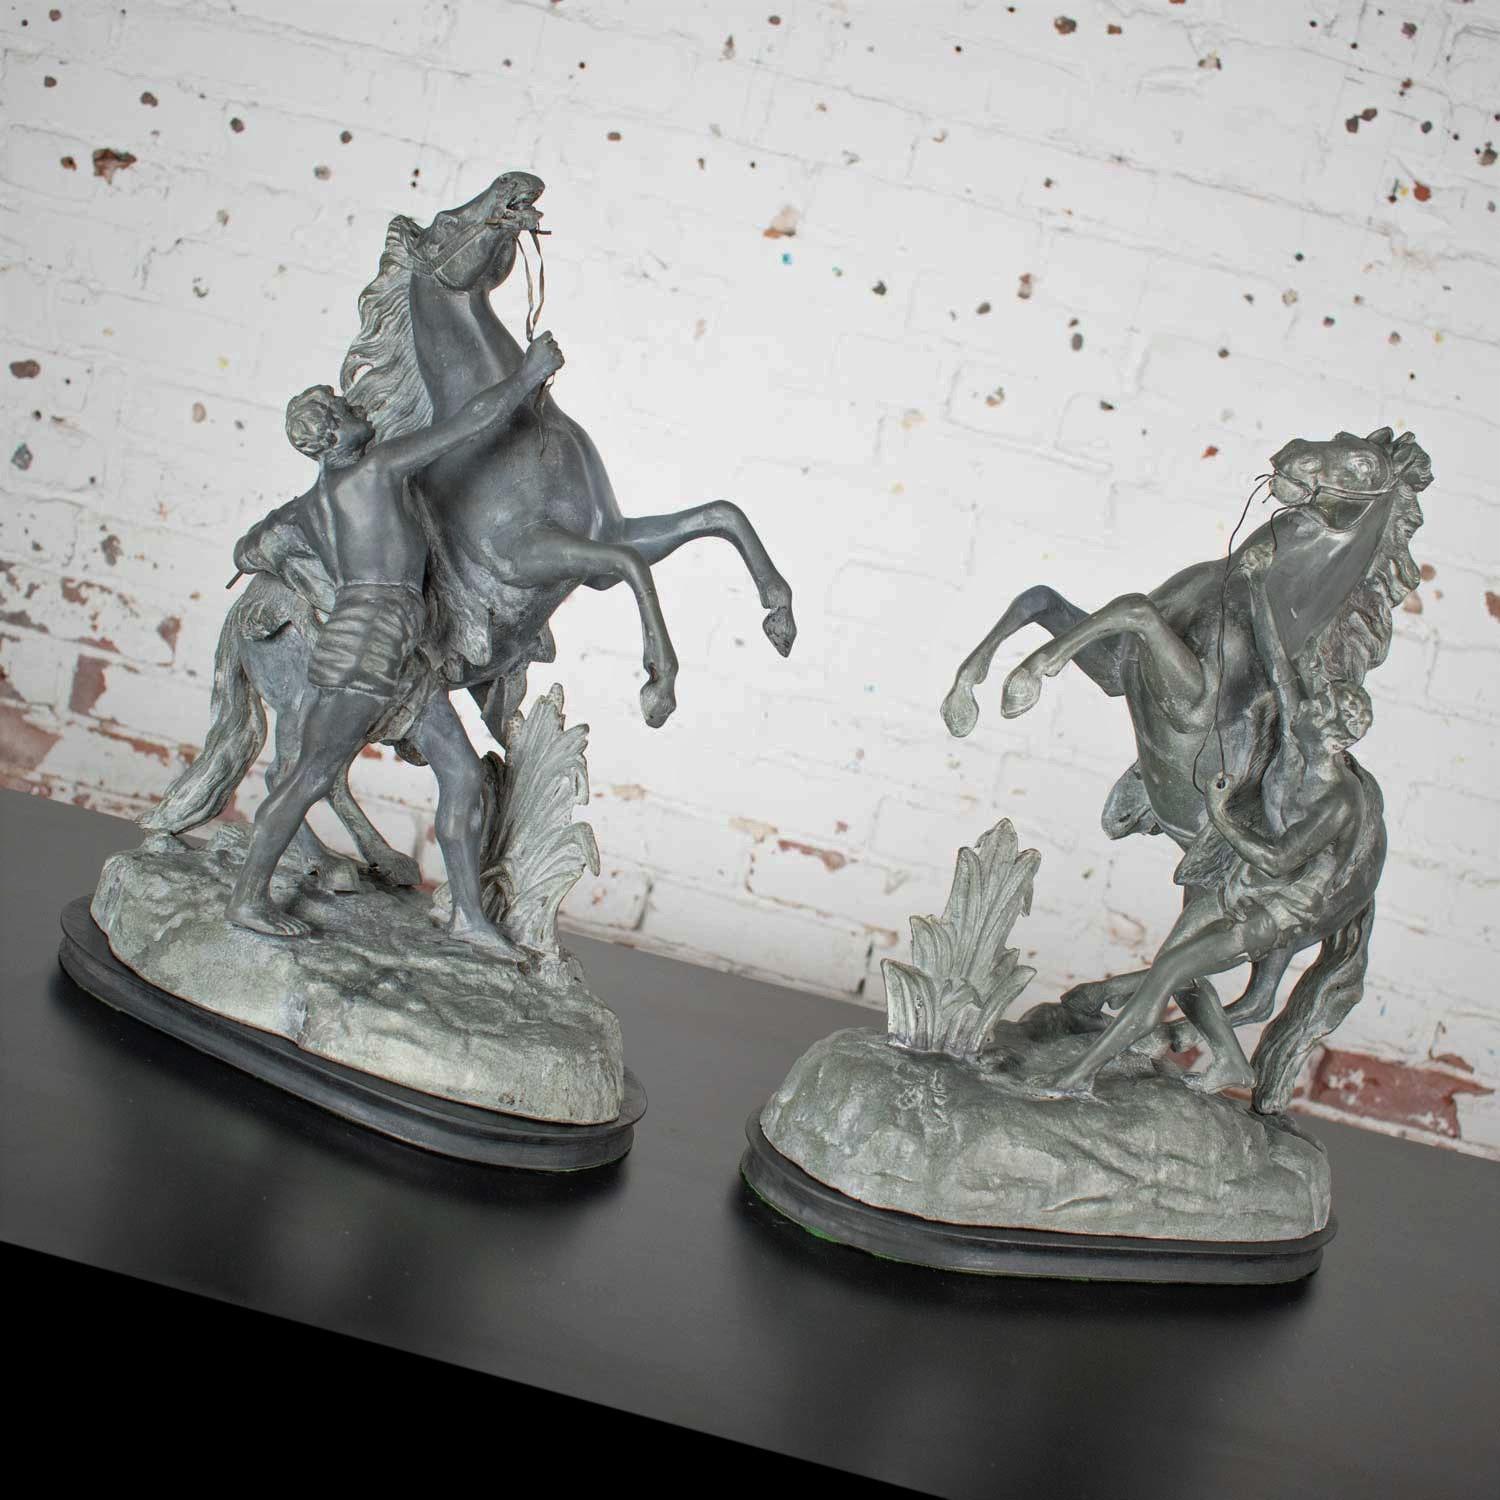 Fabulous antique replica spelter detailed sculptures of the Marly rearing horse and groom original stone sculptures by Guillaume Coustou. These replica sculptures were extremely popular in the Victorian era and were done by many artists. This pair